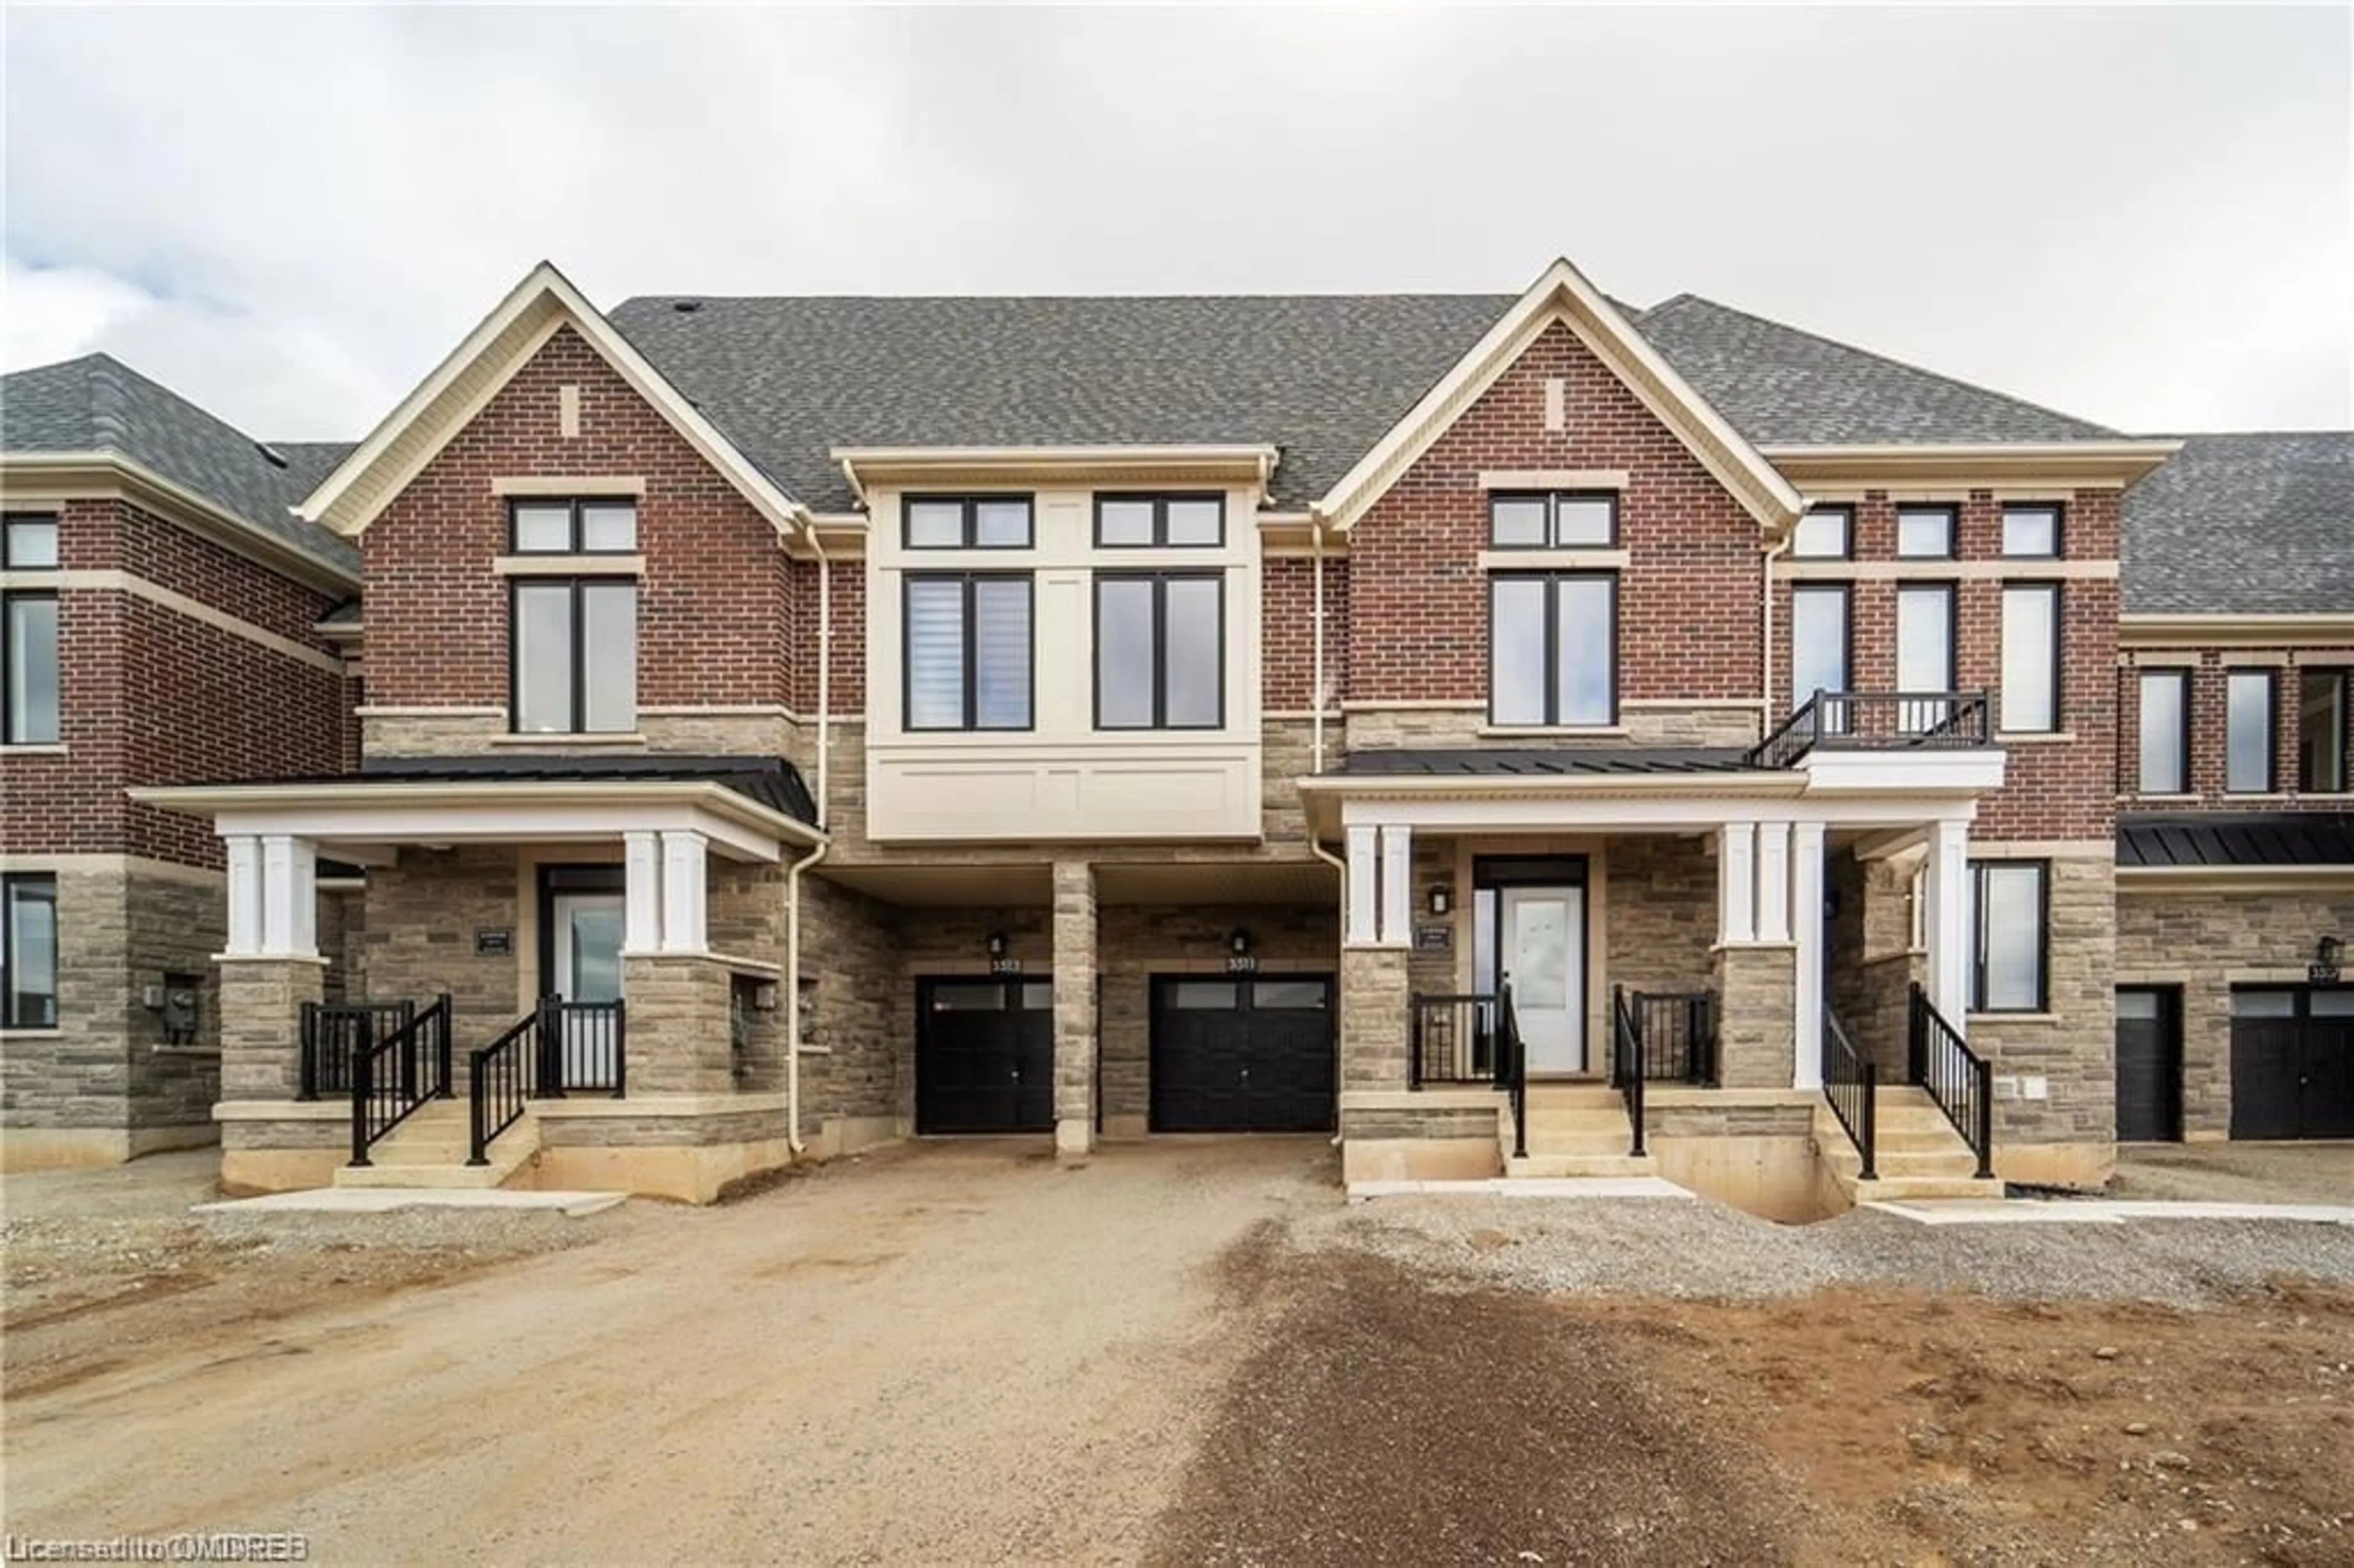 Home with brick exterior material for 3511 Post Rd, Oakville Ontario L6H 7W5